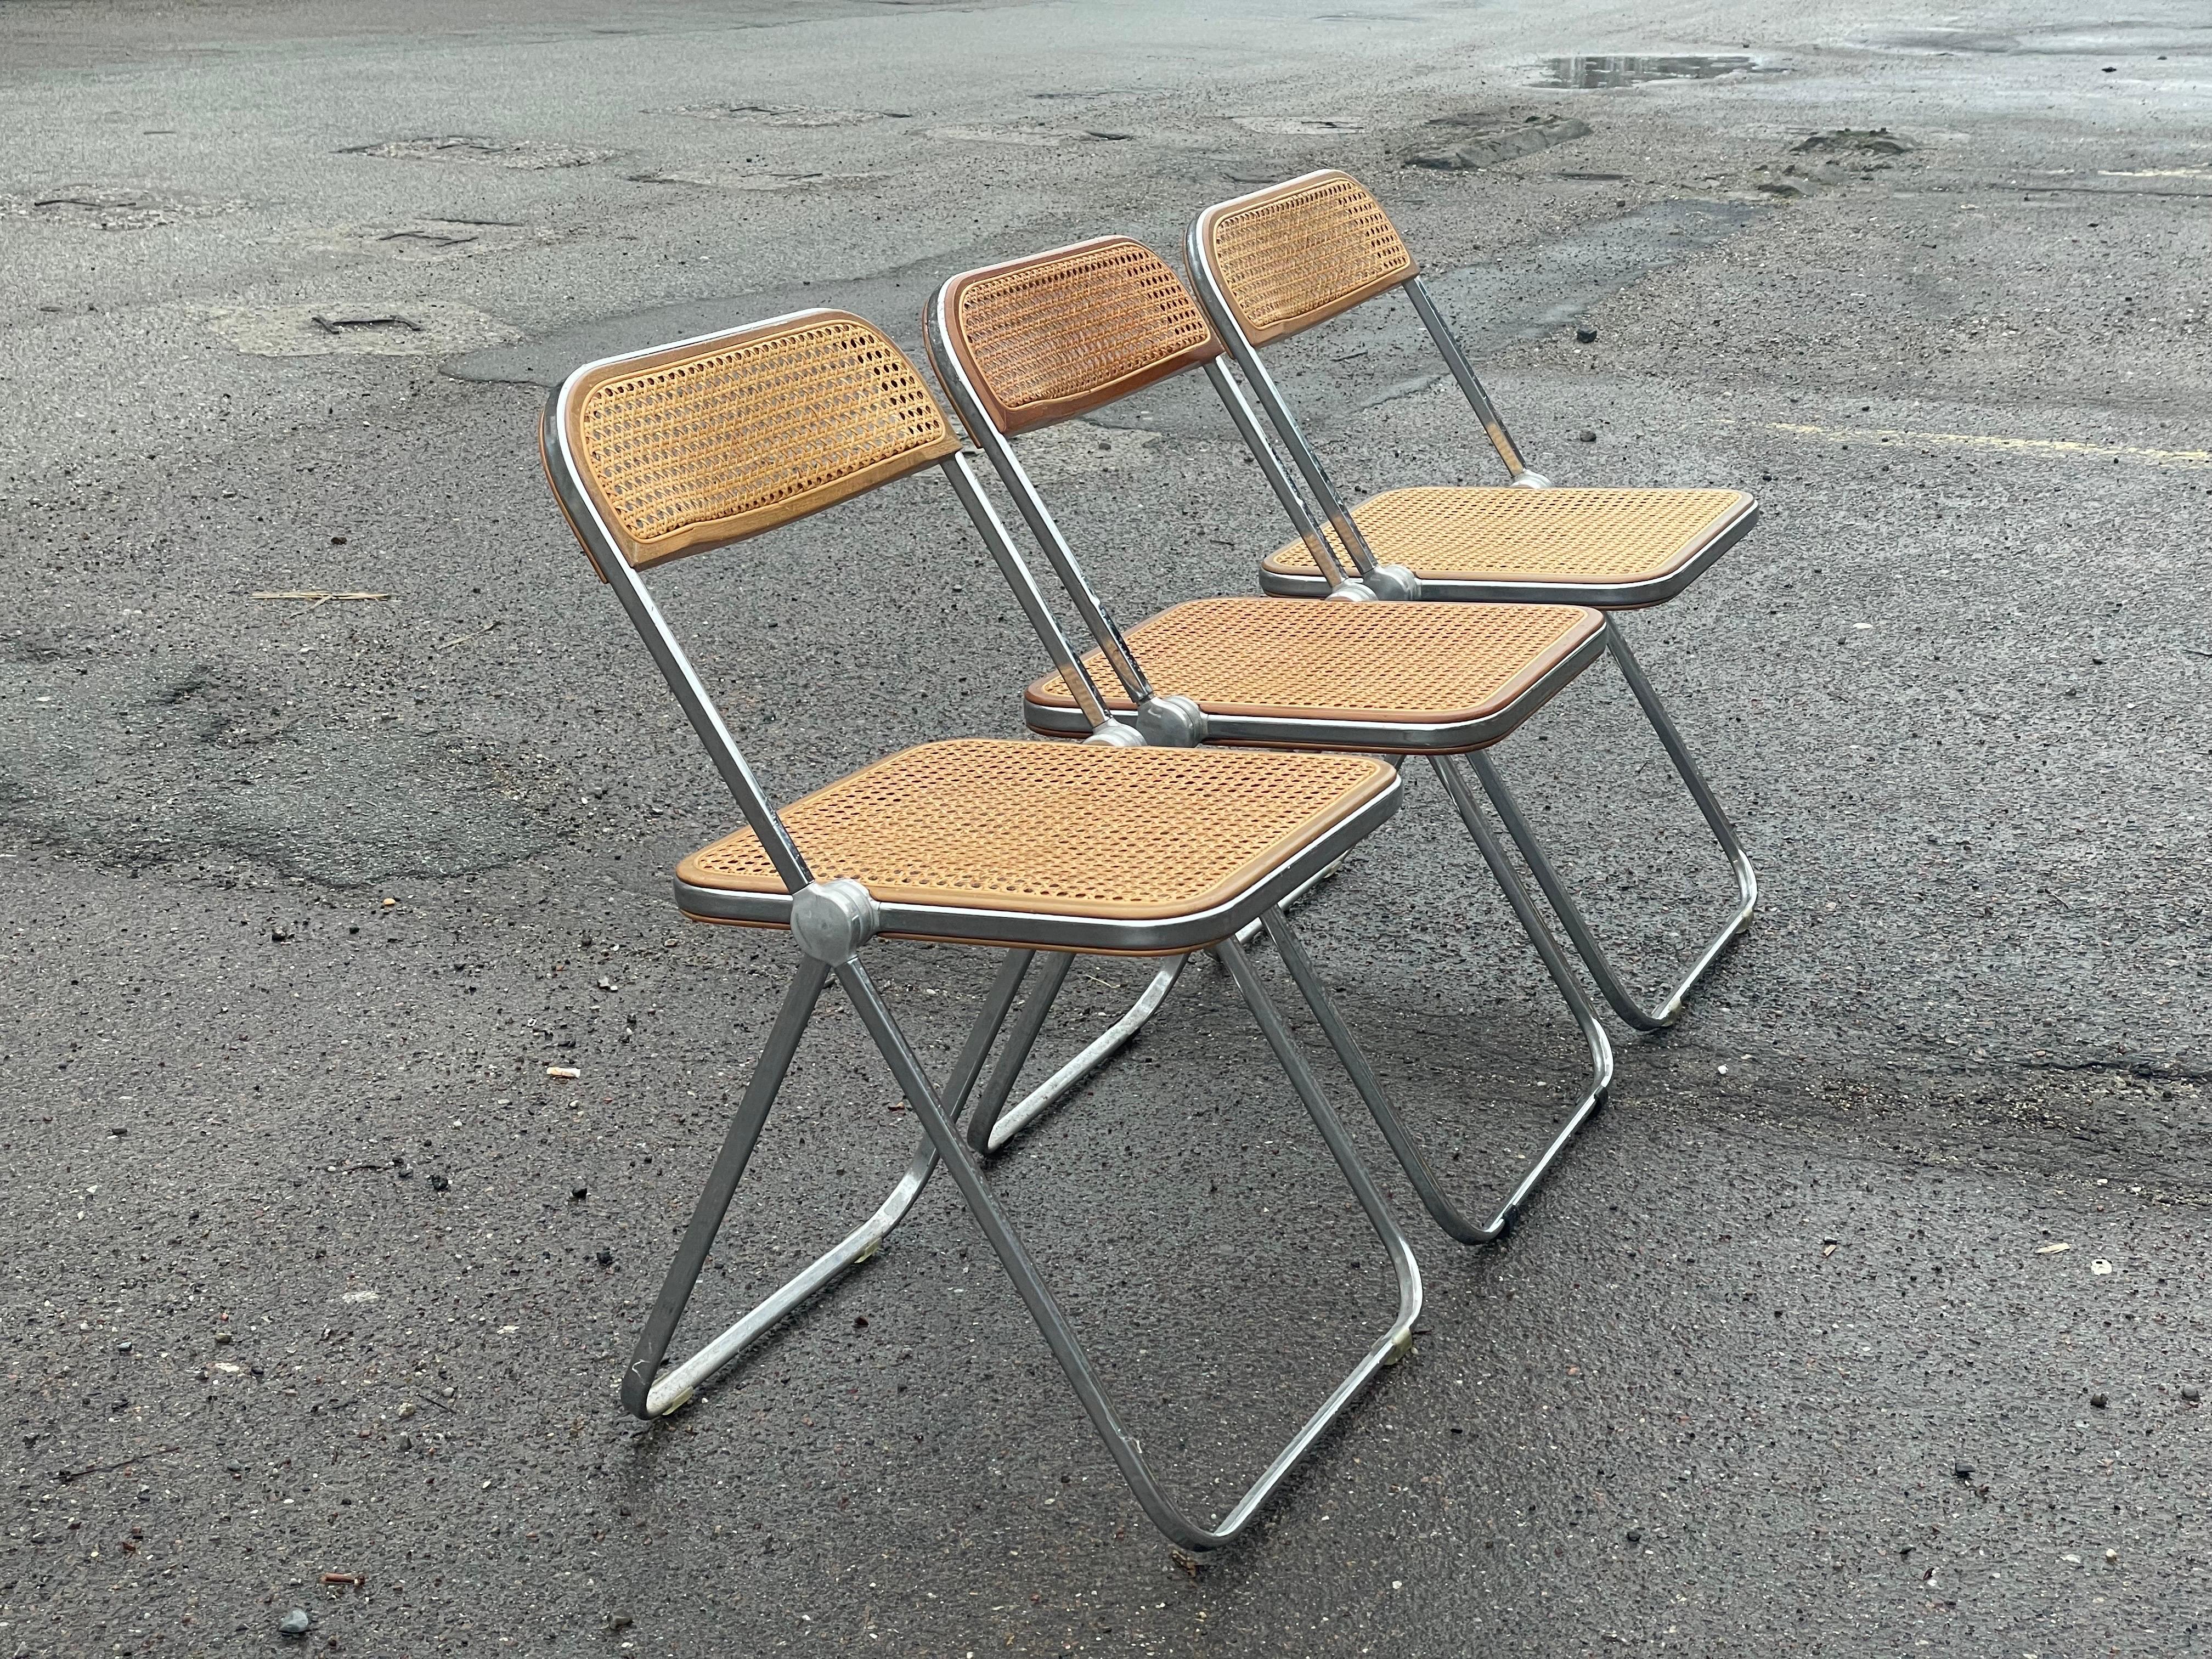 Mid-20th Century Vintage Plia Cane Folding Chair by Giancarlo Piretti for Castelli, 1960’s For Sale